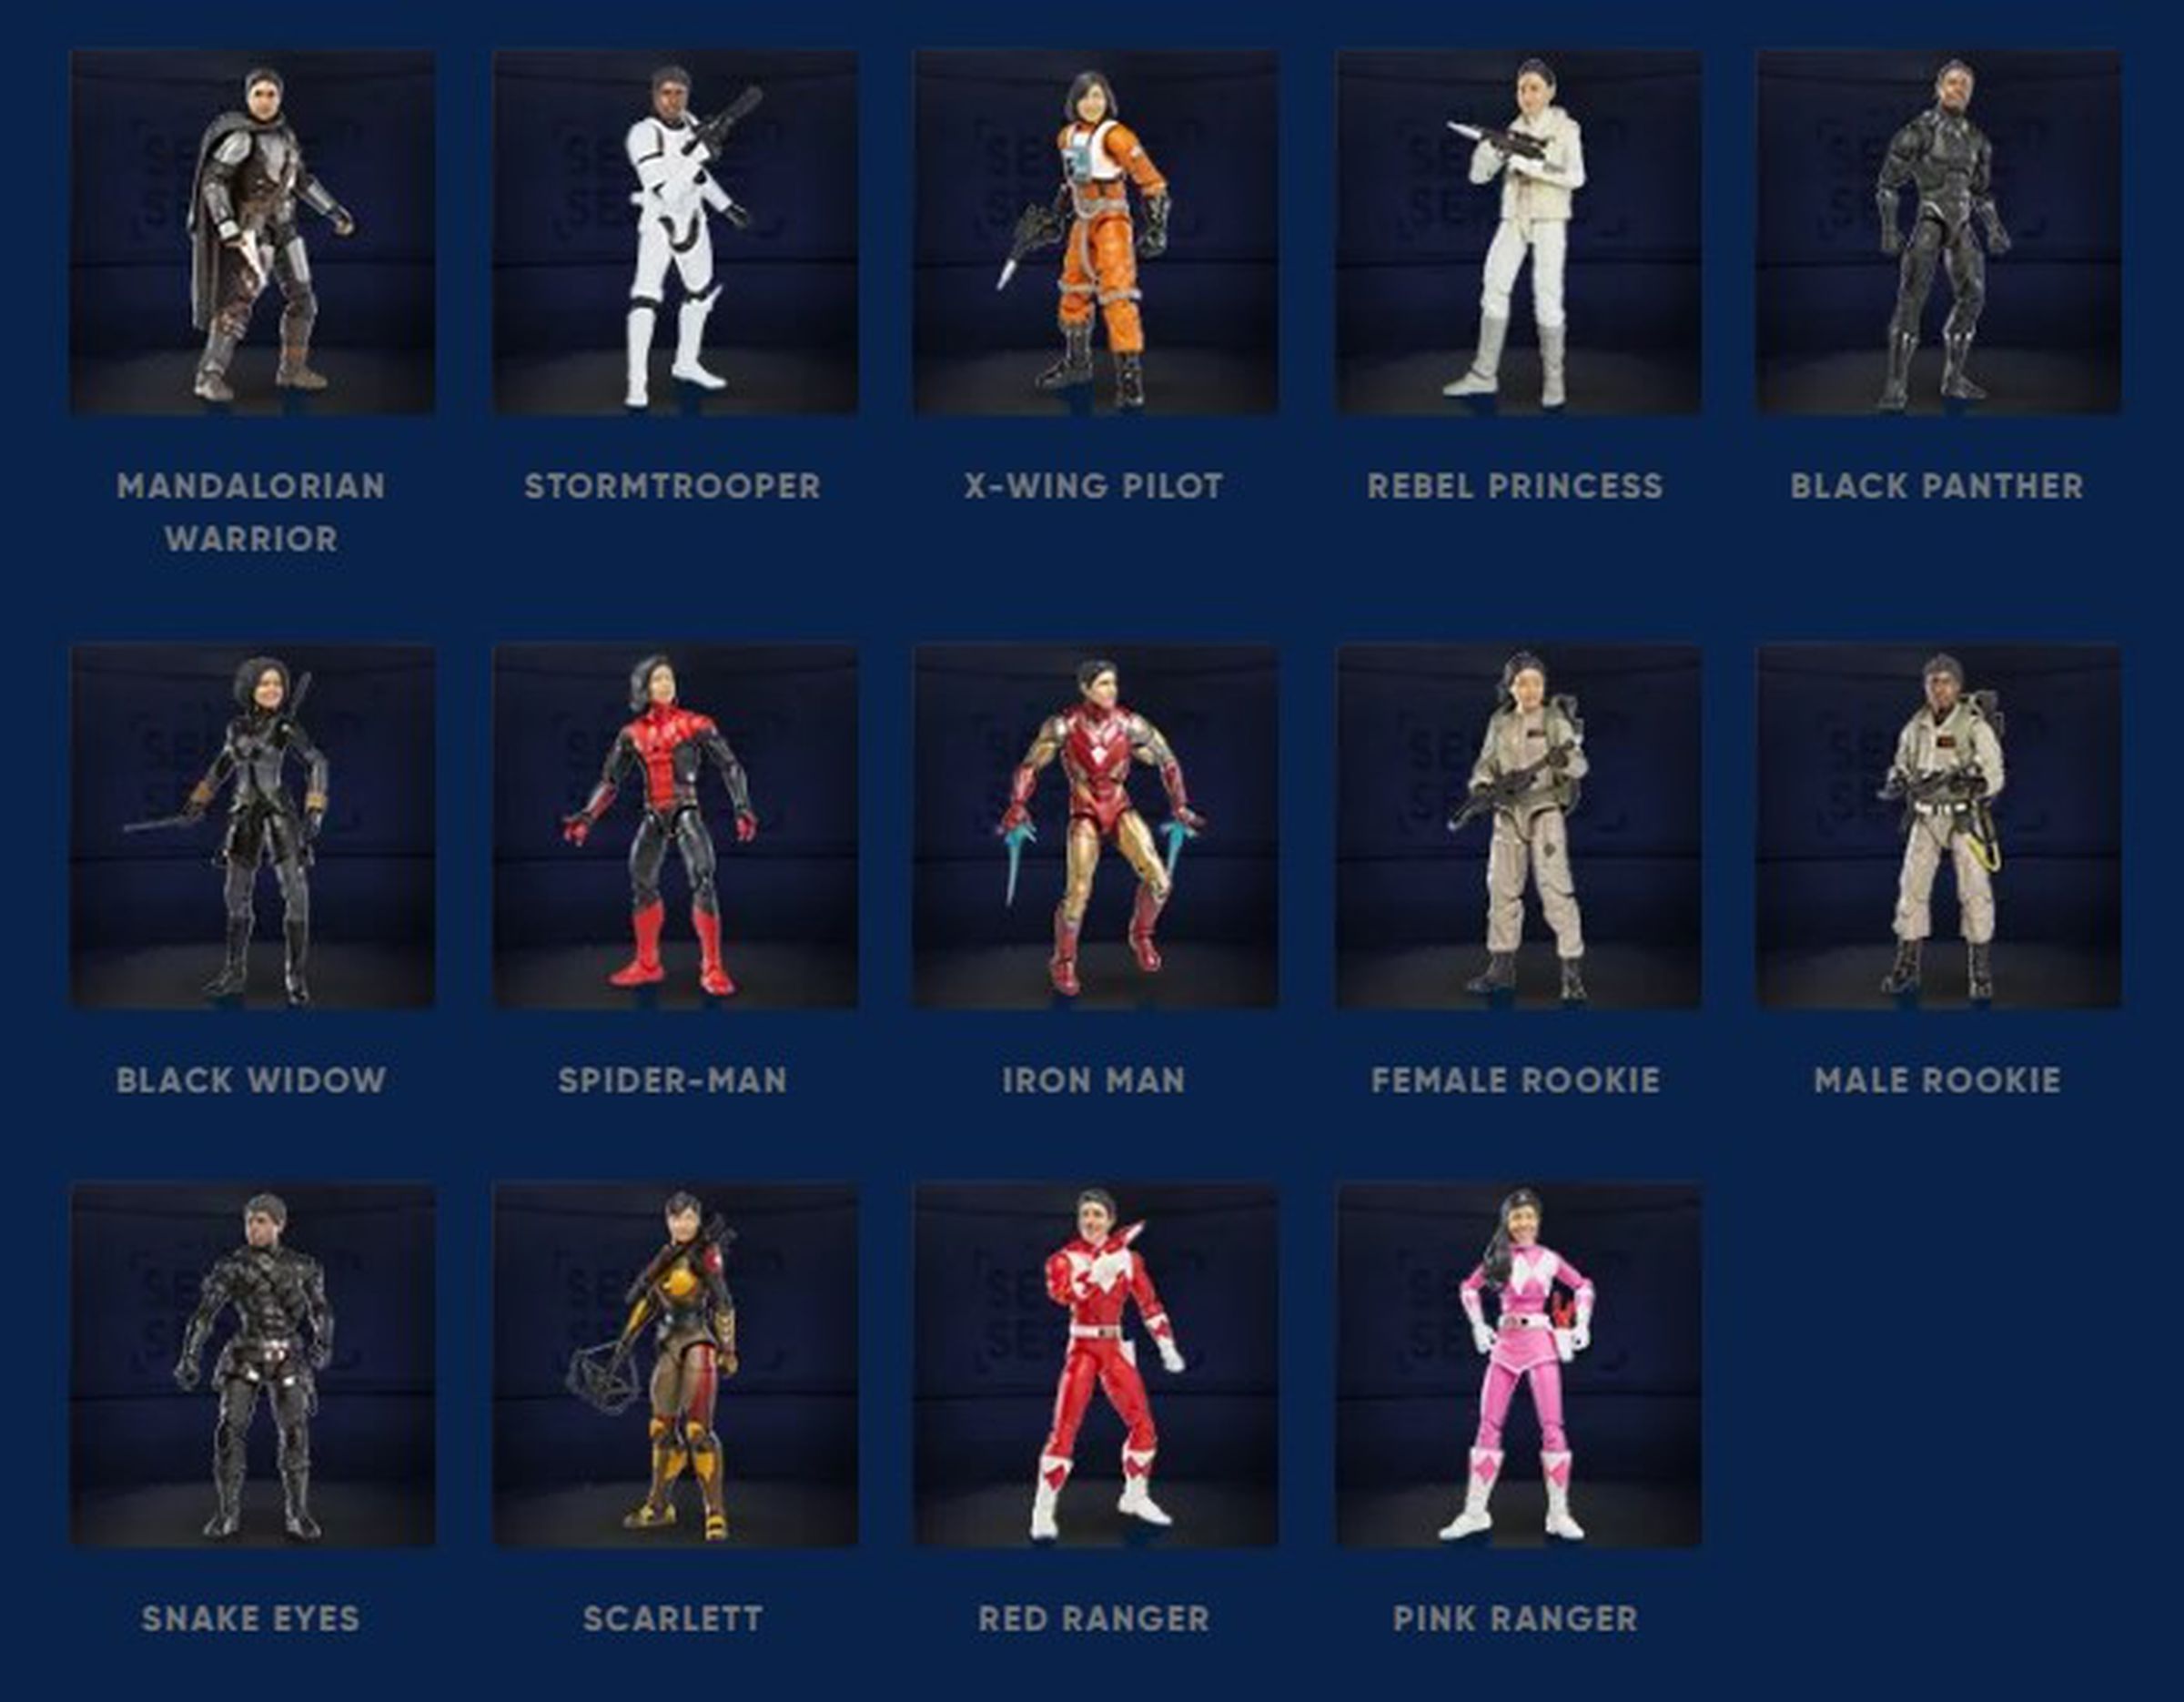 Screenshot of the available figures, including Mandalorian warrior, Stormtrooper, X-Wing pilot, rebel princess, Black Panther, Black Widow, Spider-Man, Iron Man, female rookie, male rookie, Snake Eyes, Scarlett, Red Ranger, and Pink Ranger .